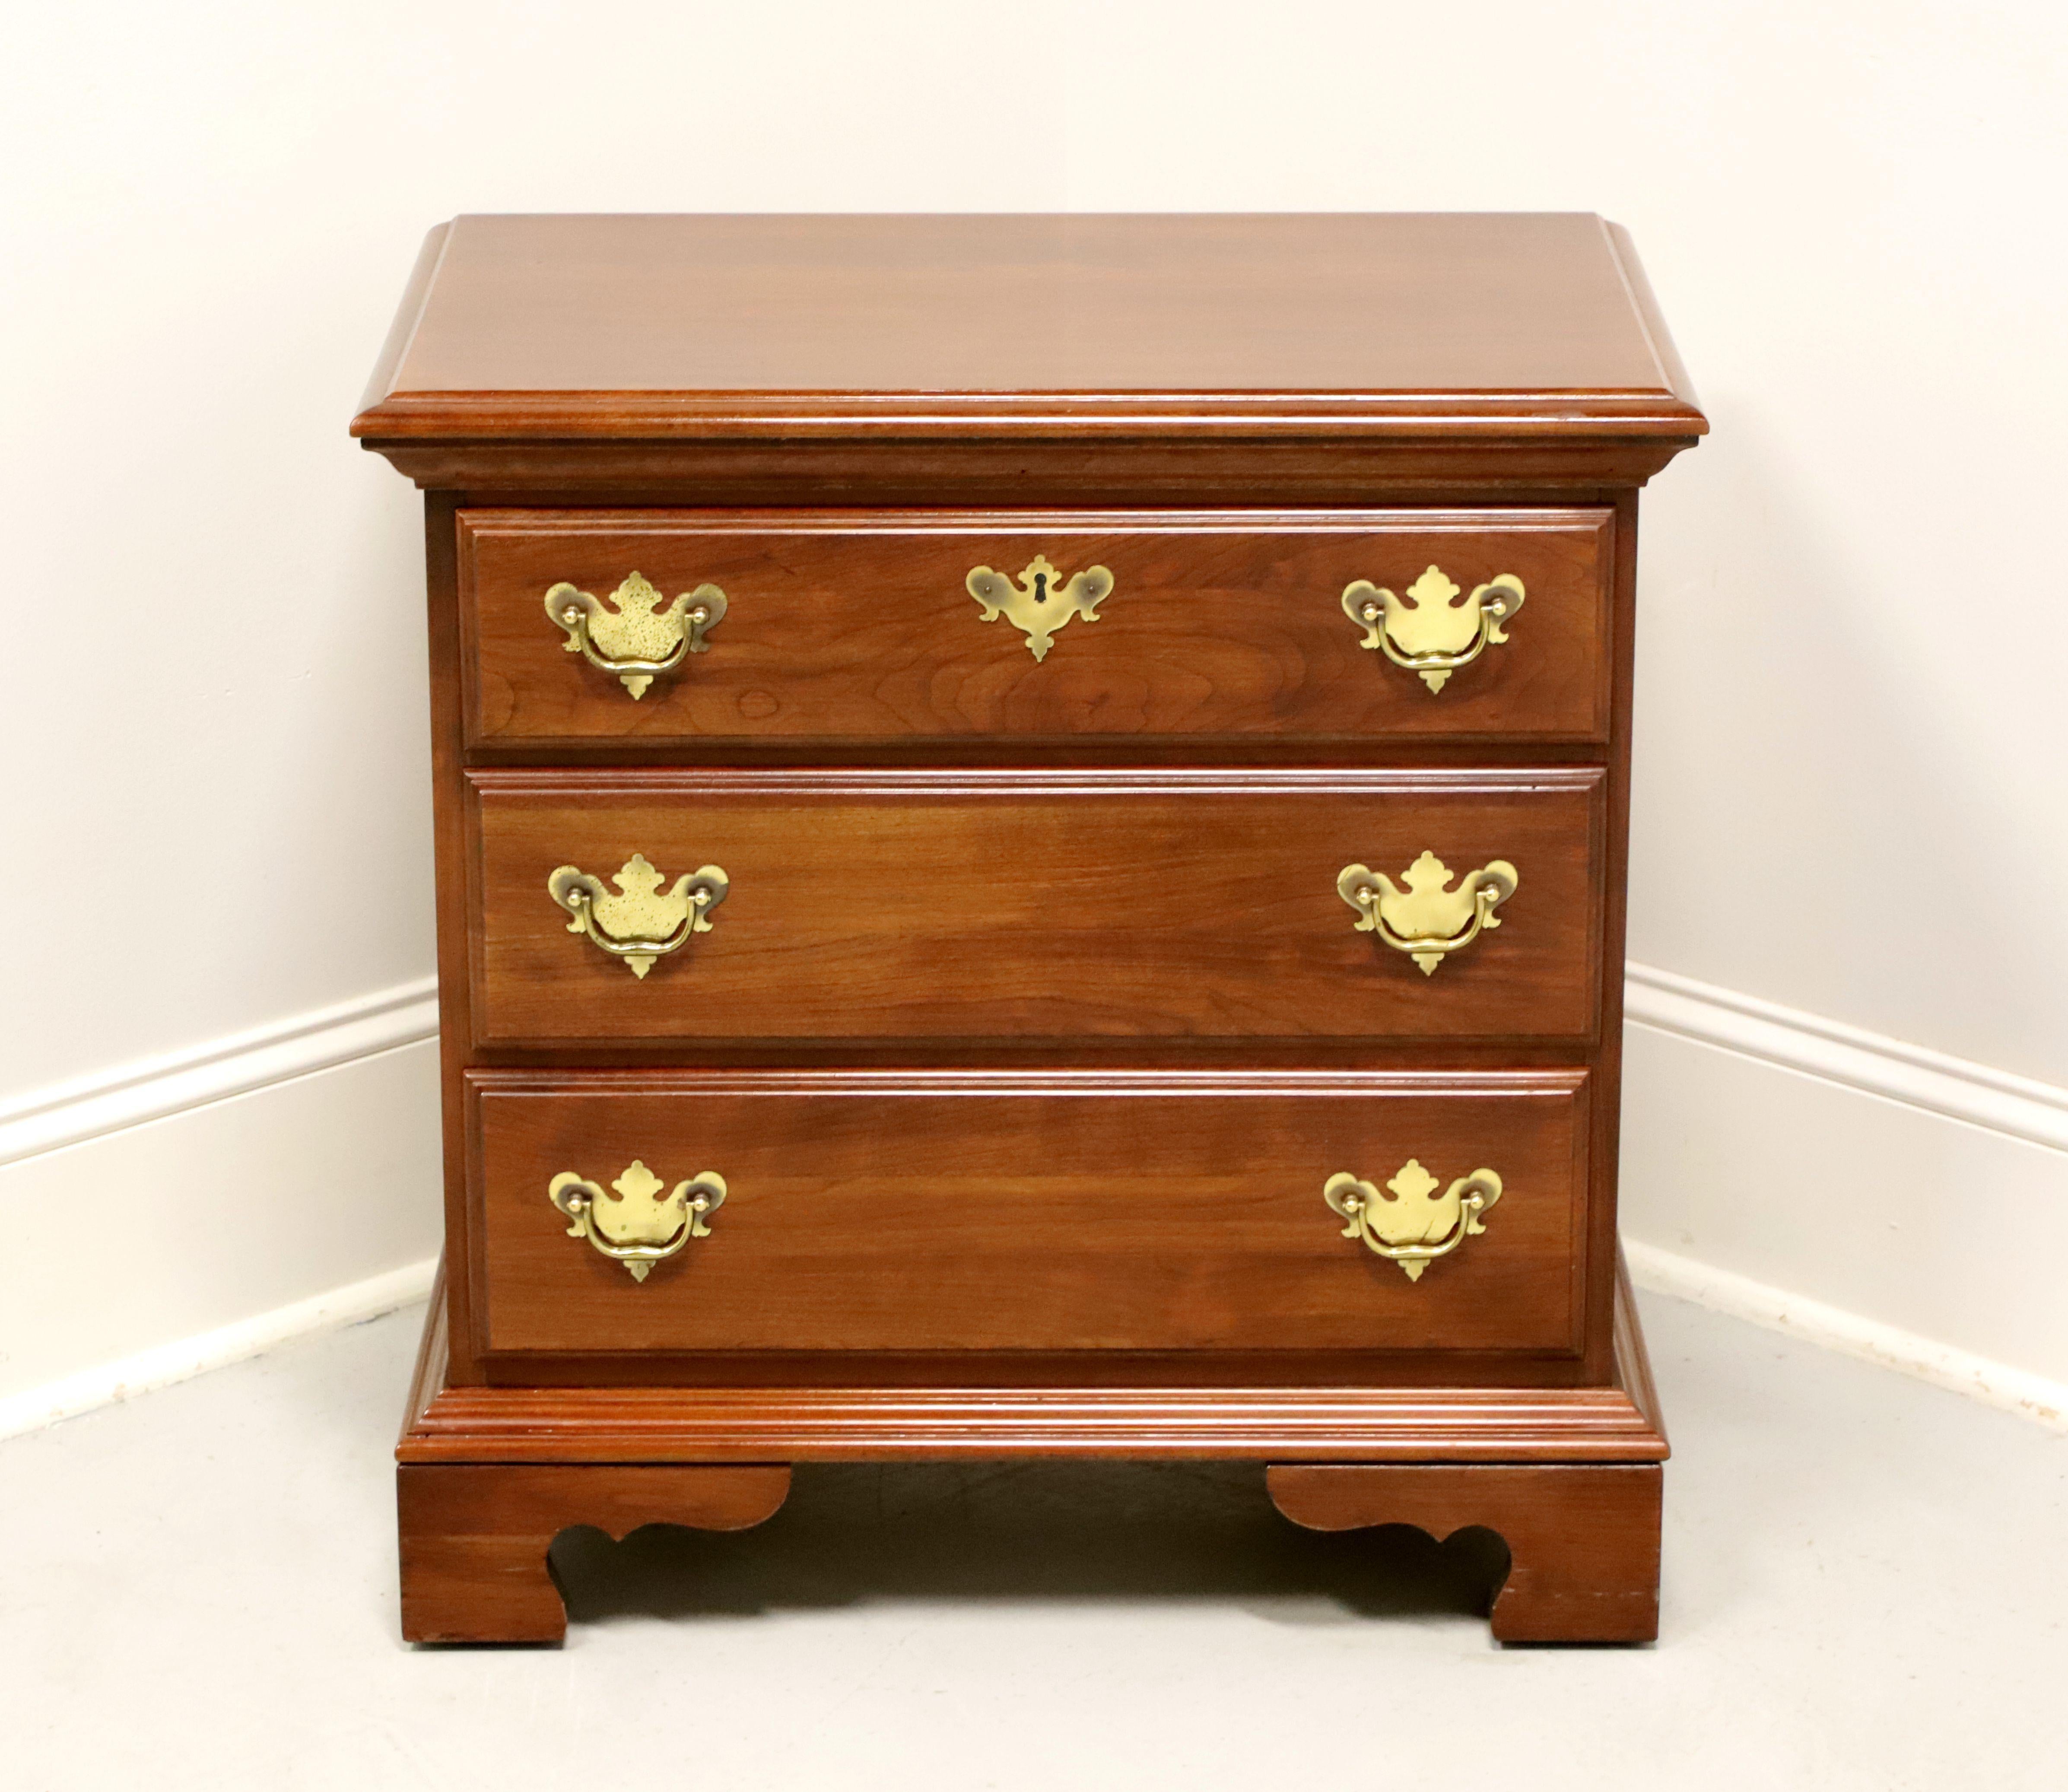 A Chippendale style bedside chest by Jamestown Sterling. Cherry with brass hardware, ogee edge to the top, and bracket feet. Features three drawers of dovetail construction, top drawer having a faux keyhole escutcheon. Made in the USA, in the late